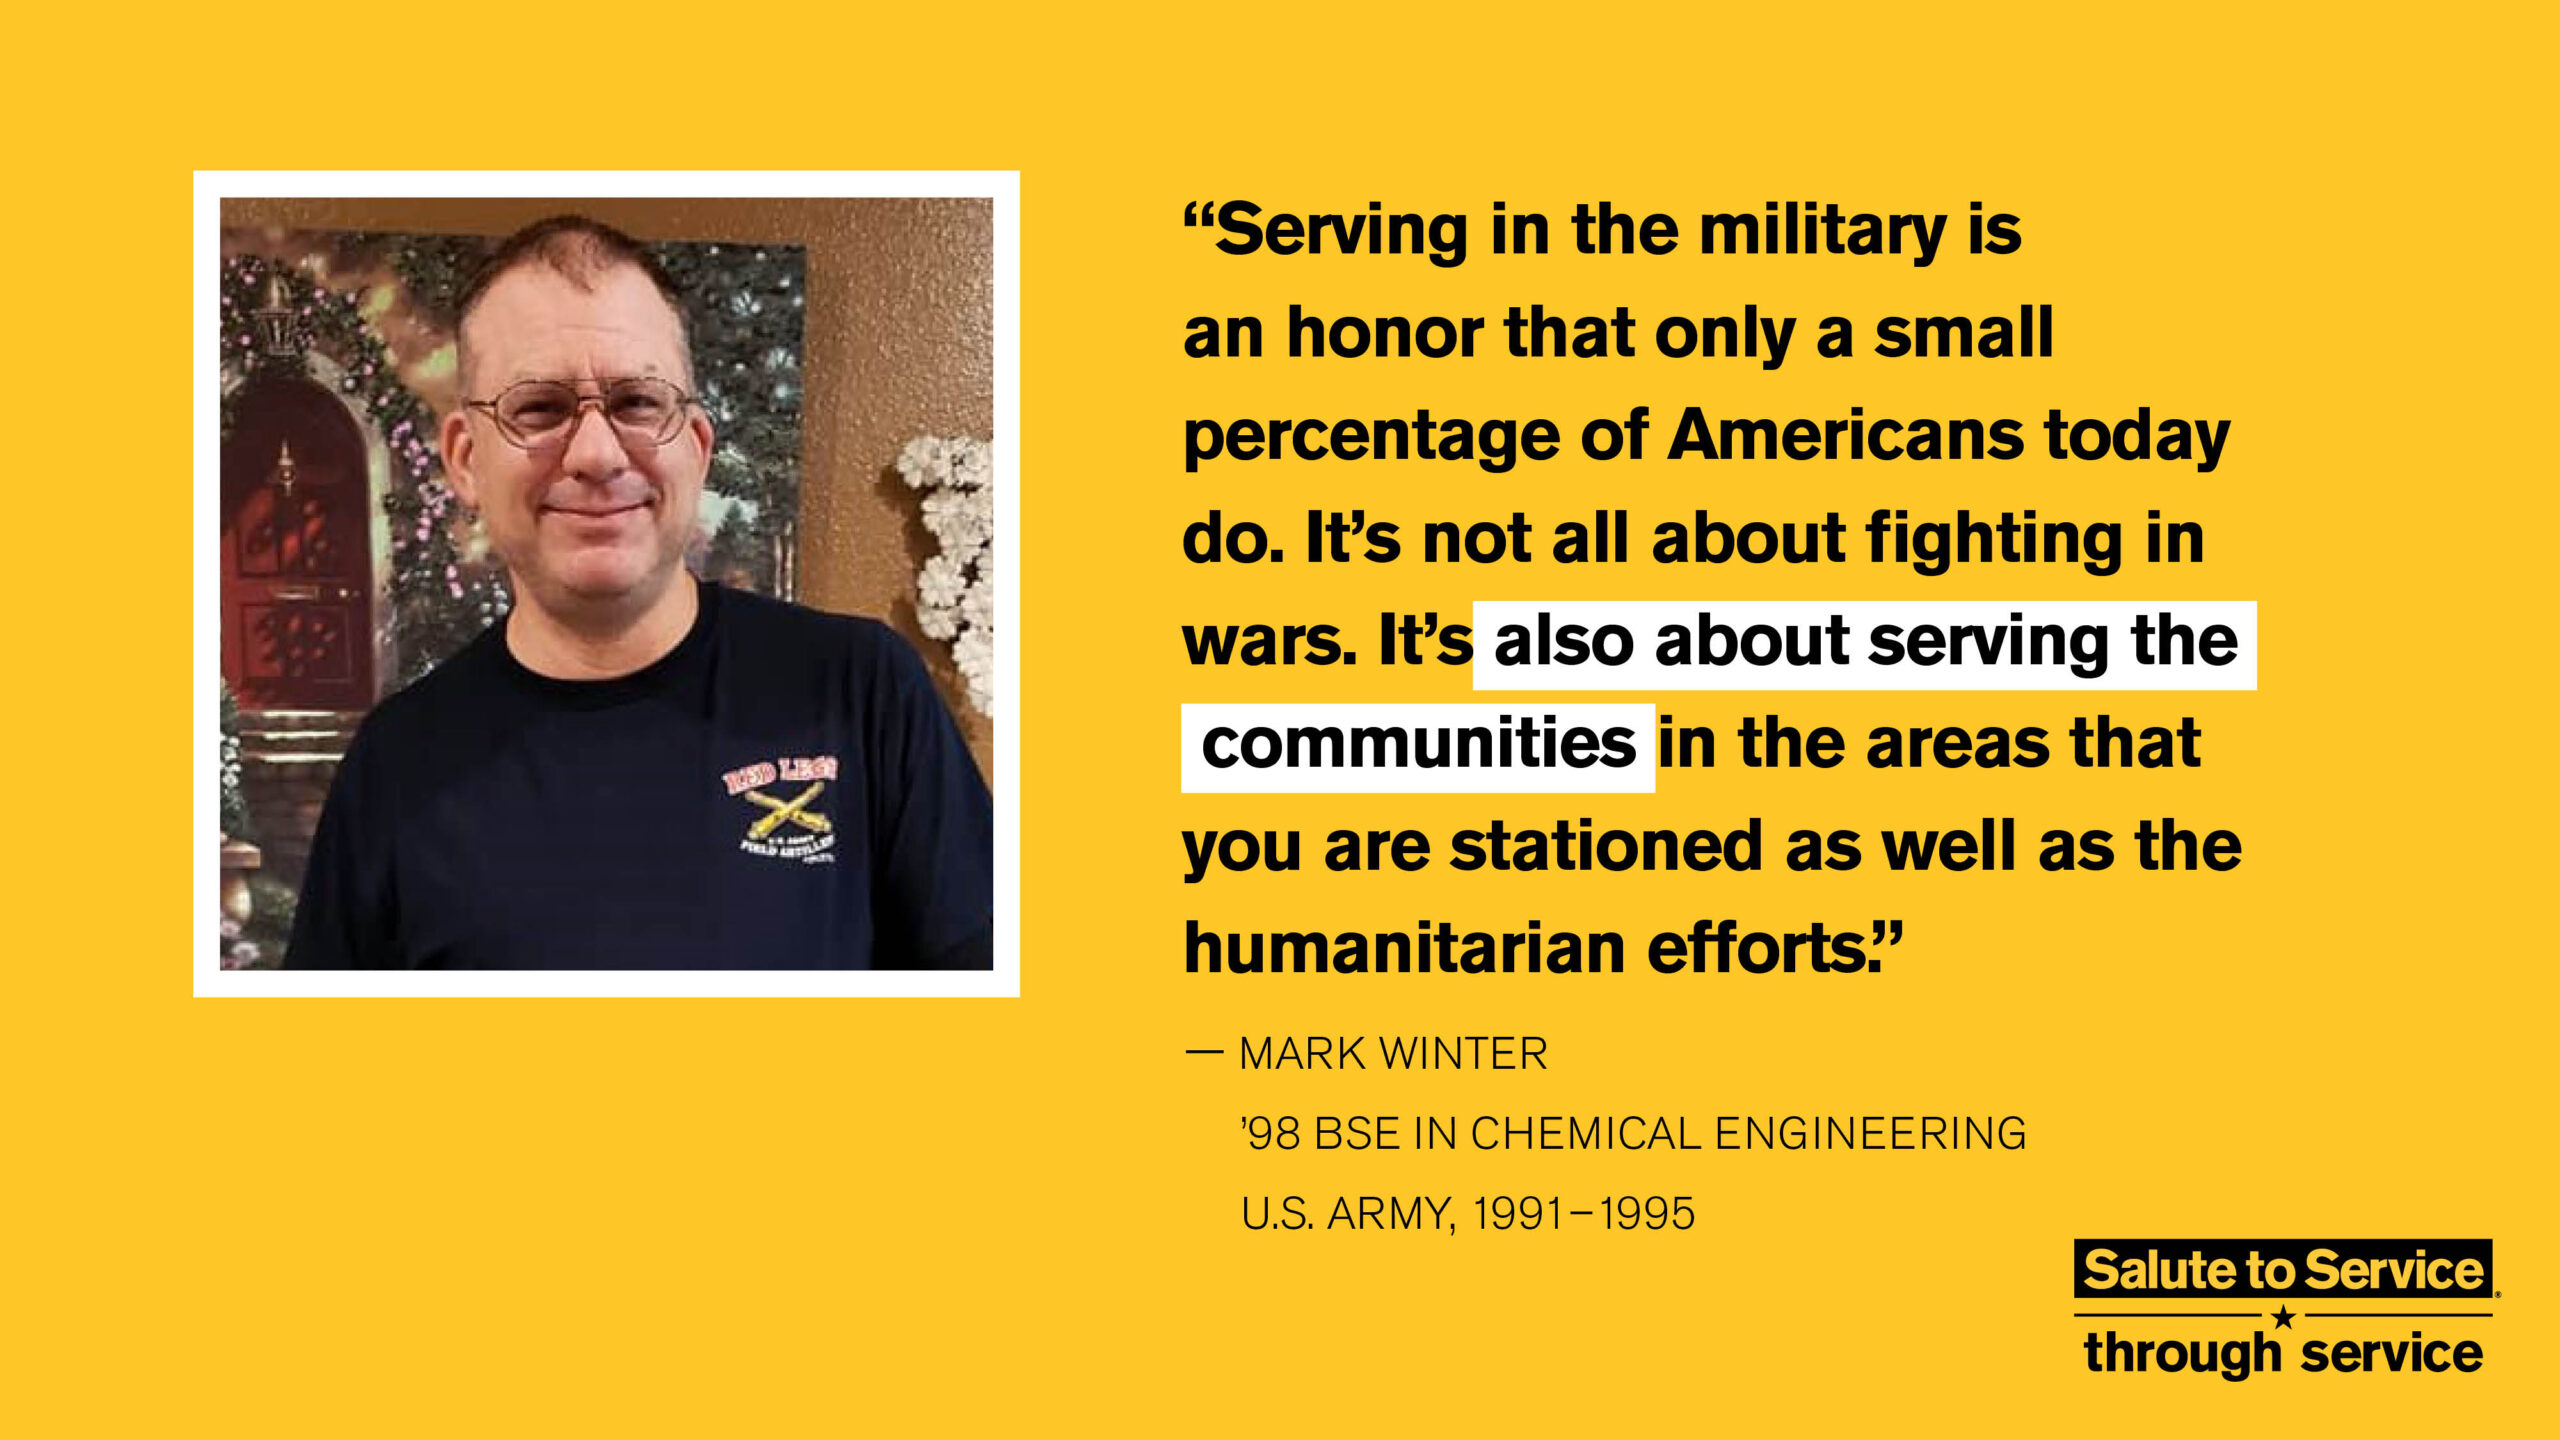 Salute to Service graphic with text that says "Serving in the military is an honor that only a small percentage of Americans today do. It's not all about fighting in wars. It's also about serving the communities in the areas that you are stationed as we well as the humanitarian efforts." - Mark Winter